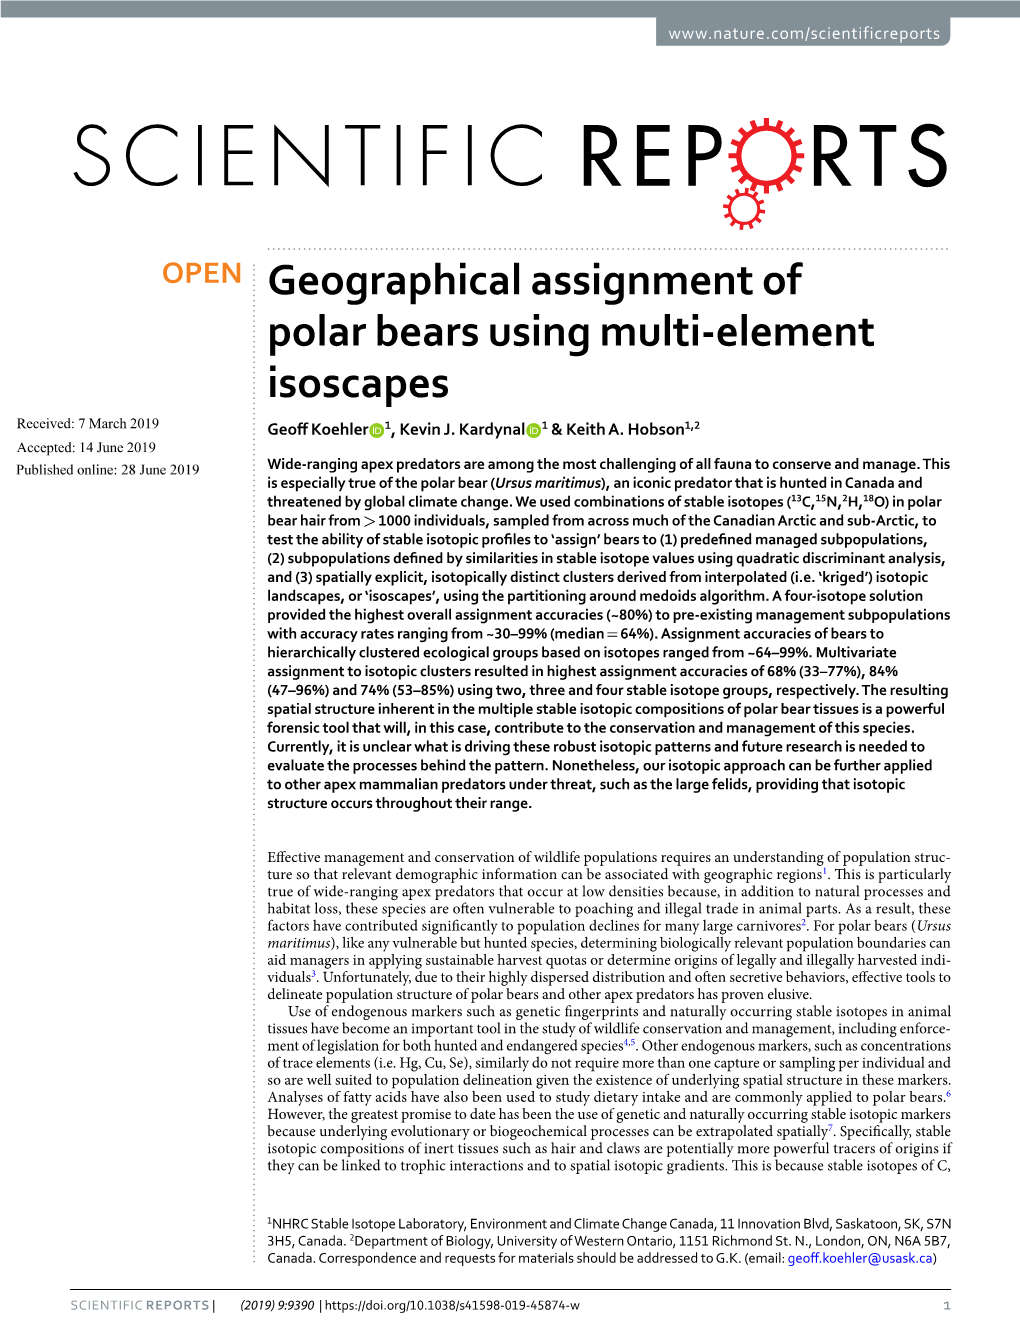 Geographical Assignment of Polar Bears Using Multi-Element Isoscapes Received: 7 March 2019 Geof Koehler 1, Kevin J